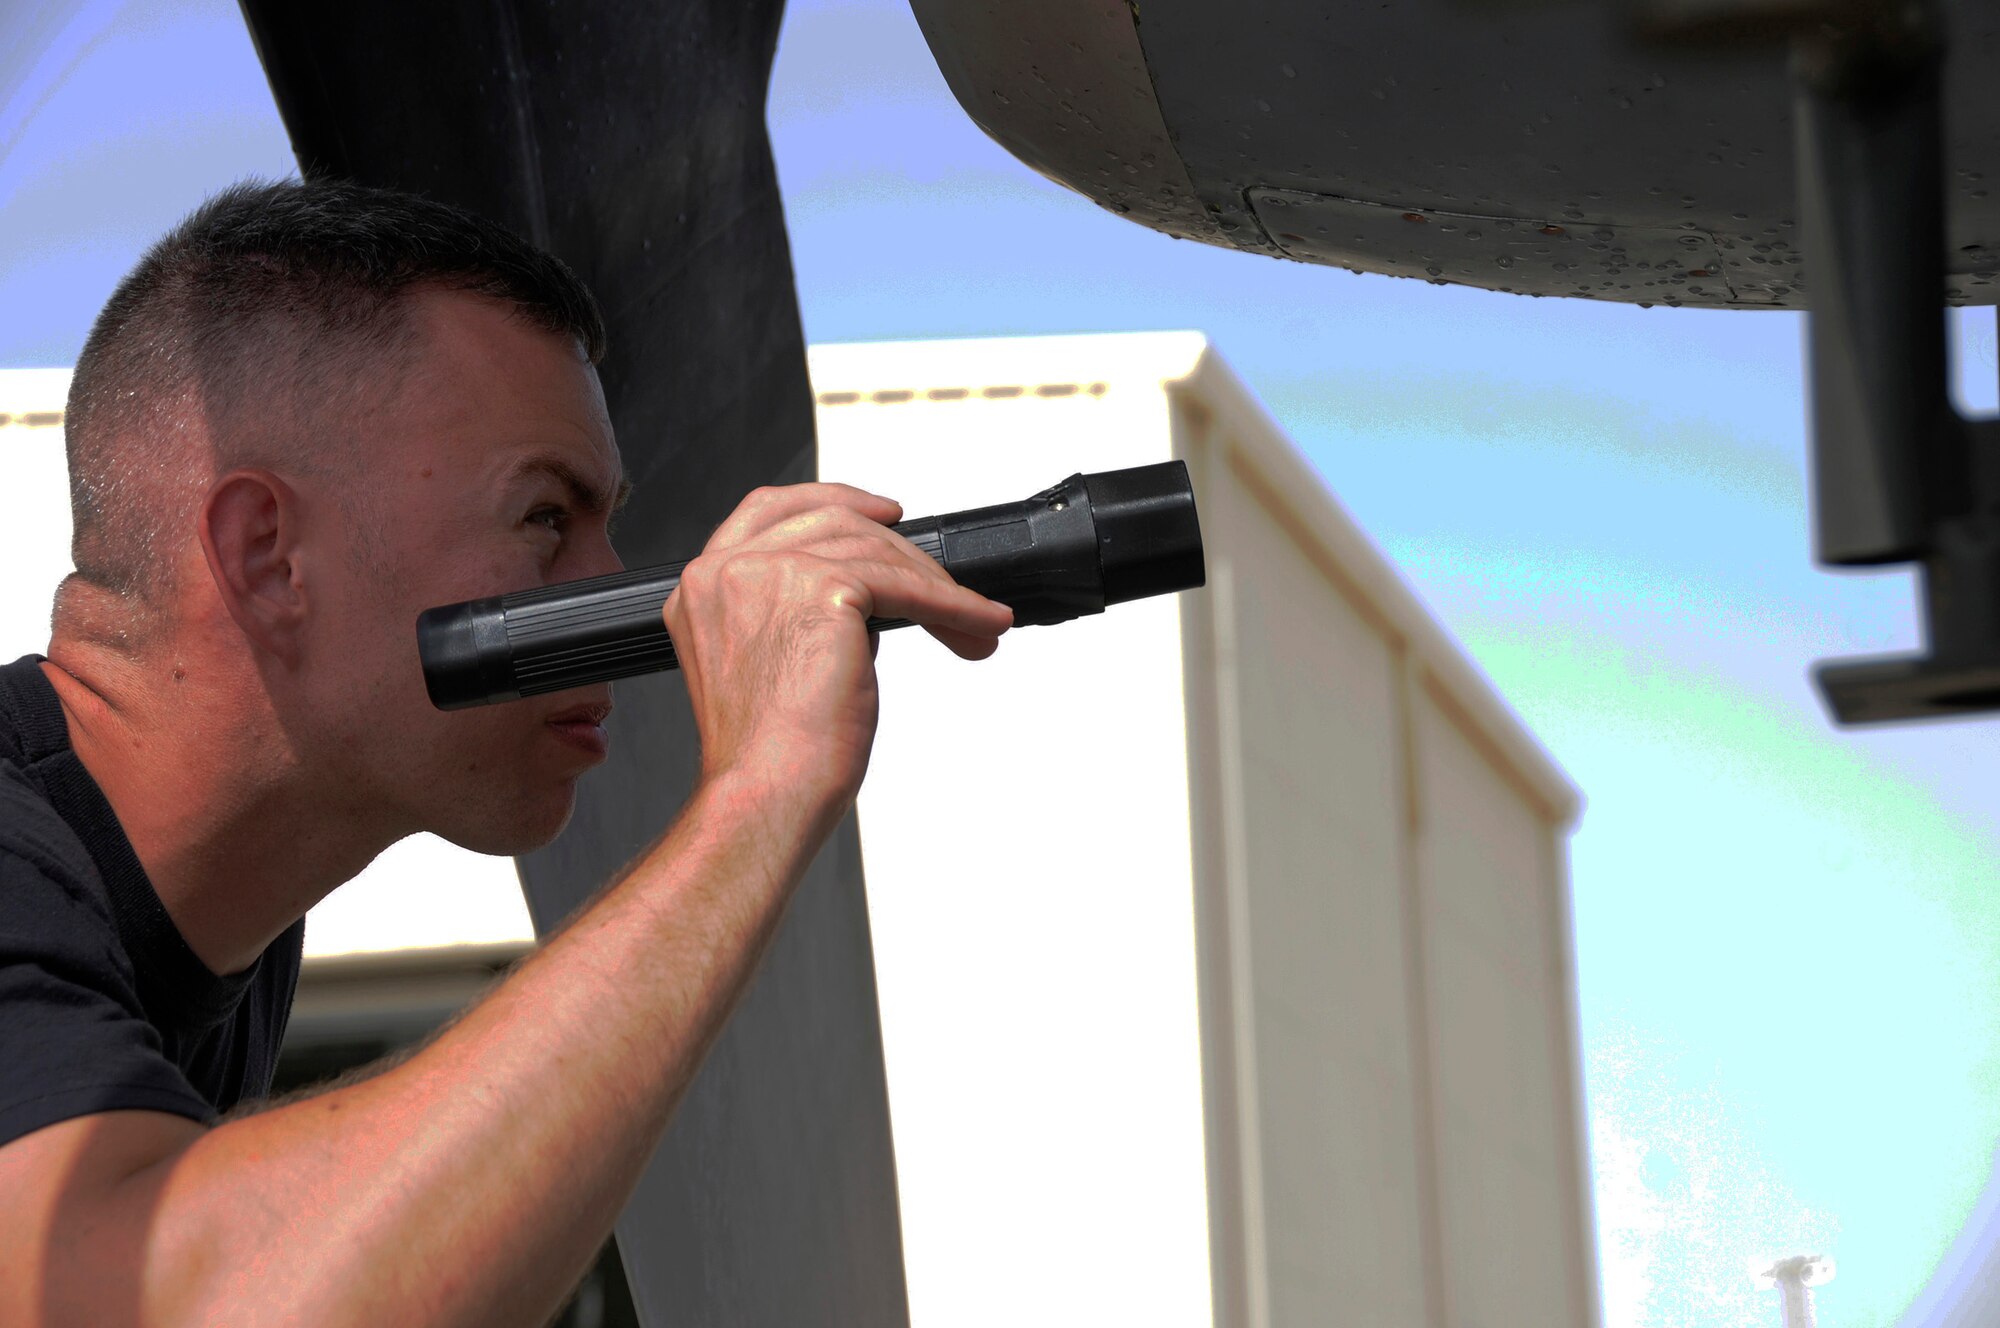 Tech. Sgt. Gregory Mathes, 379th Expeditionary Maintenance Squadron, checks the intakes for foreign object damage to compressor blades and loose rivets prior to an engine operations test Sept. 3, 2008, at an undisclosed air base in Southwest Asia.  Checking for loose fan blades is one of the steps to get this C-130 Hercules engine back in operation.  The C-130 Hercules primarily performs the tactical portion of the airlift mission. The aircraft is capable of operating from rough, dirt strips and is the prime transport for air dropping troops and equipment into hostile areas.  Sergeant Mathes, a native of Greeneville, Tenn., is deployed from Ramstein Air Base, Germany, supporting Operations Iraqi and Enduring Freedom and Joint Task Force-Horn of Africa. (U.S. Air Force photo by Tech. Sgt. Michael Boquette/Released)